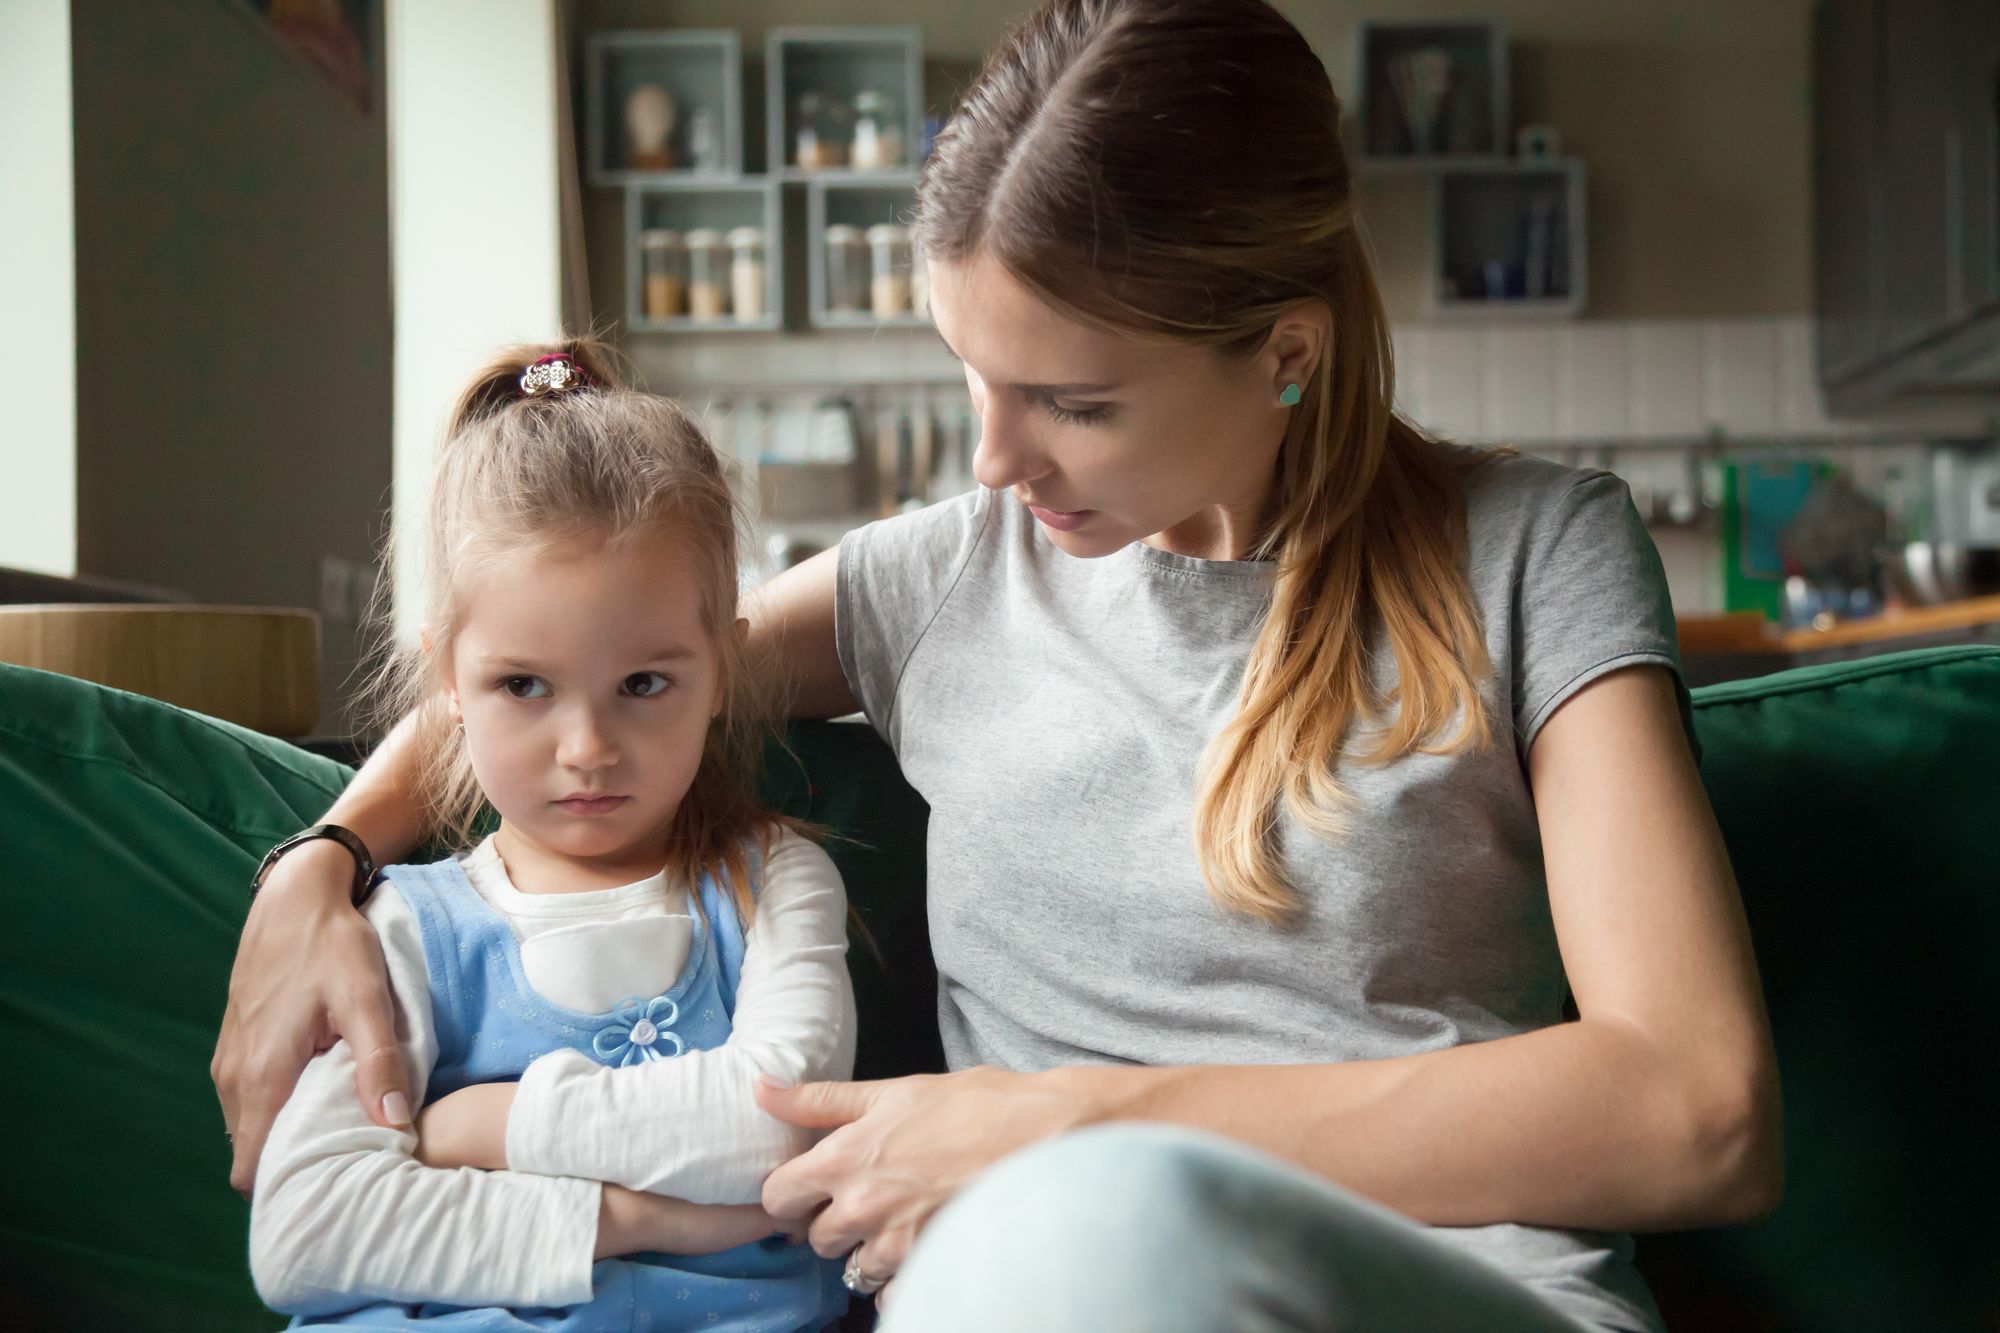 6 Ways To Help Your Child When They’re Angry